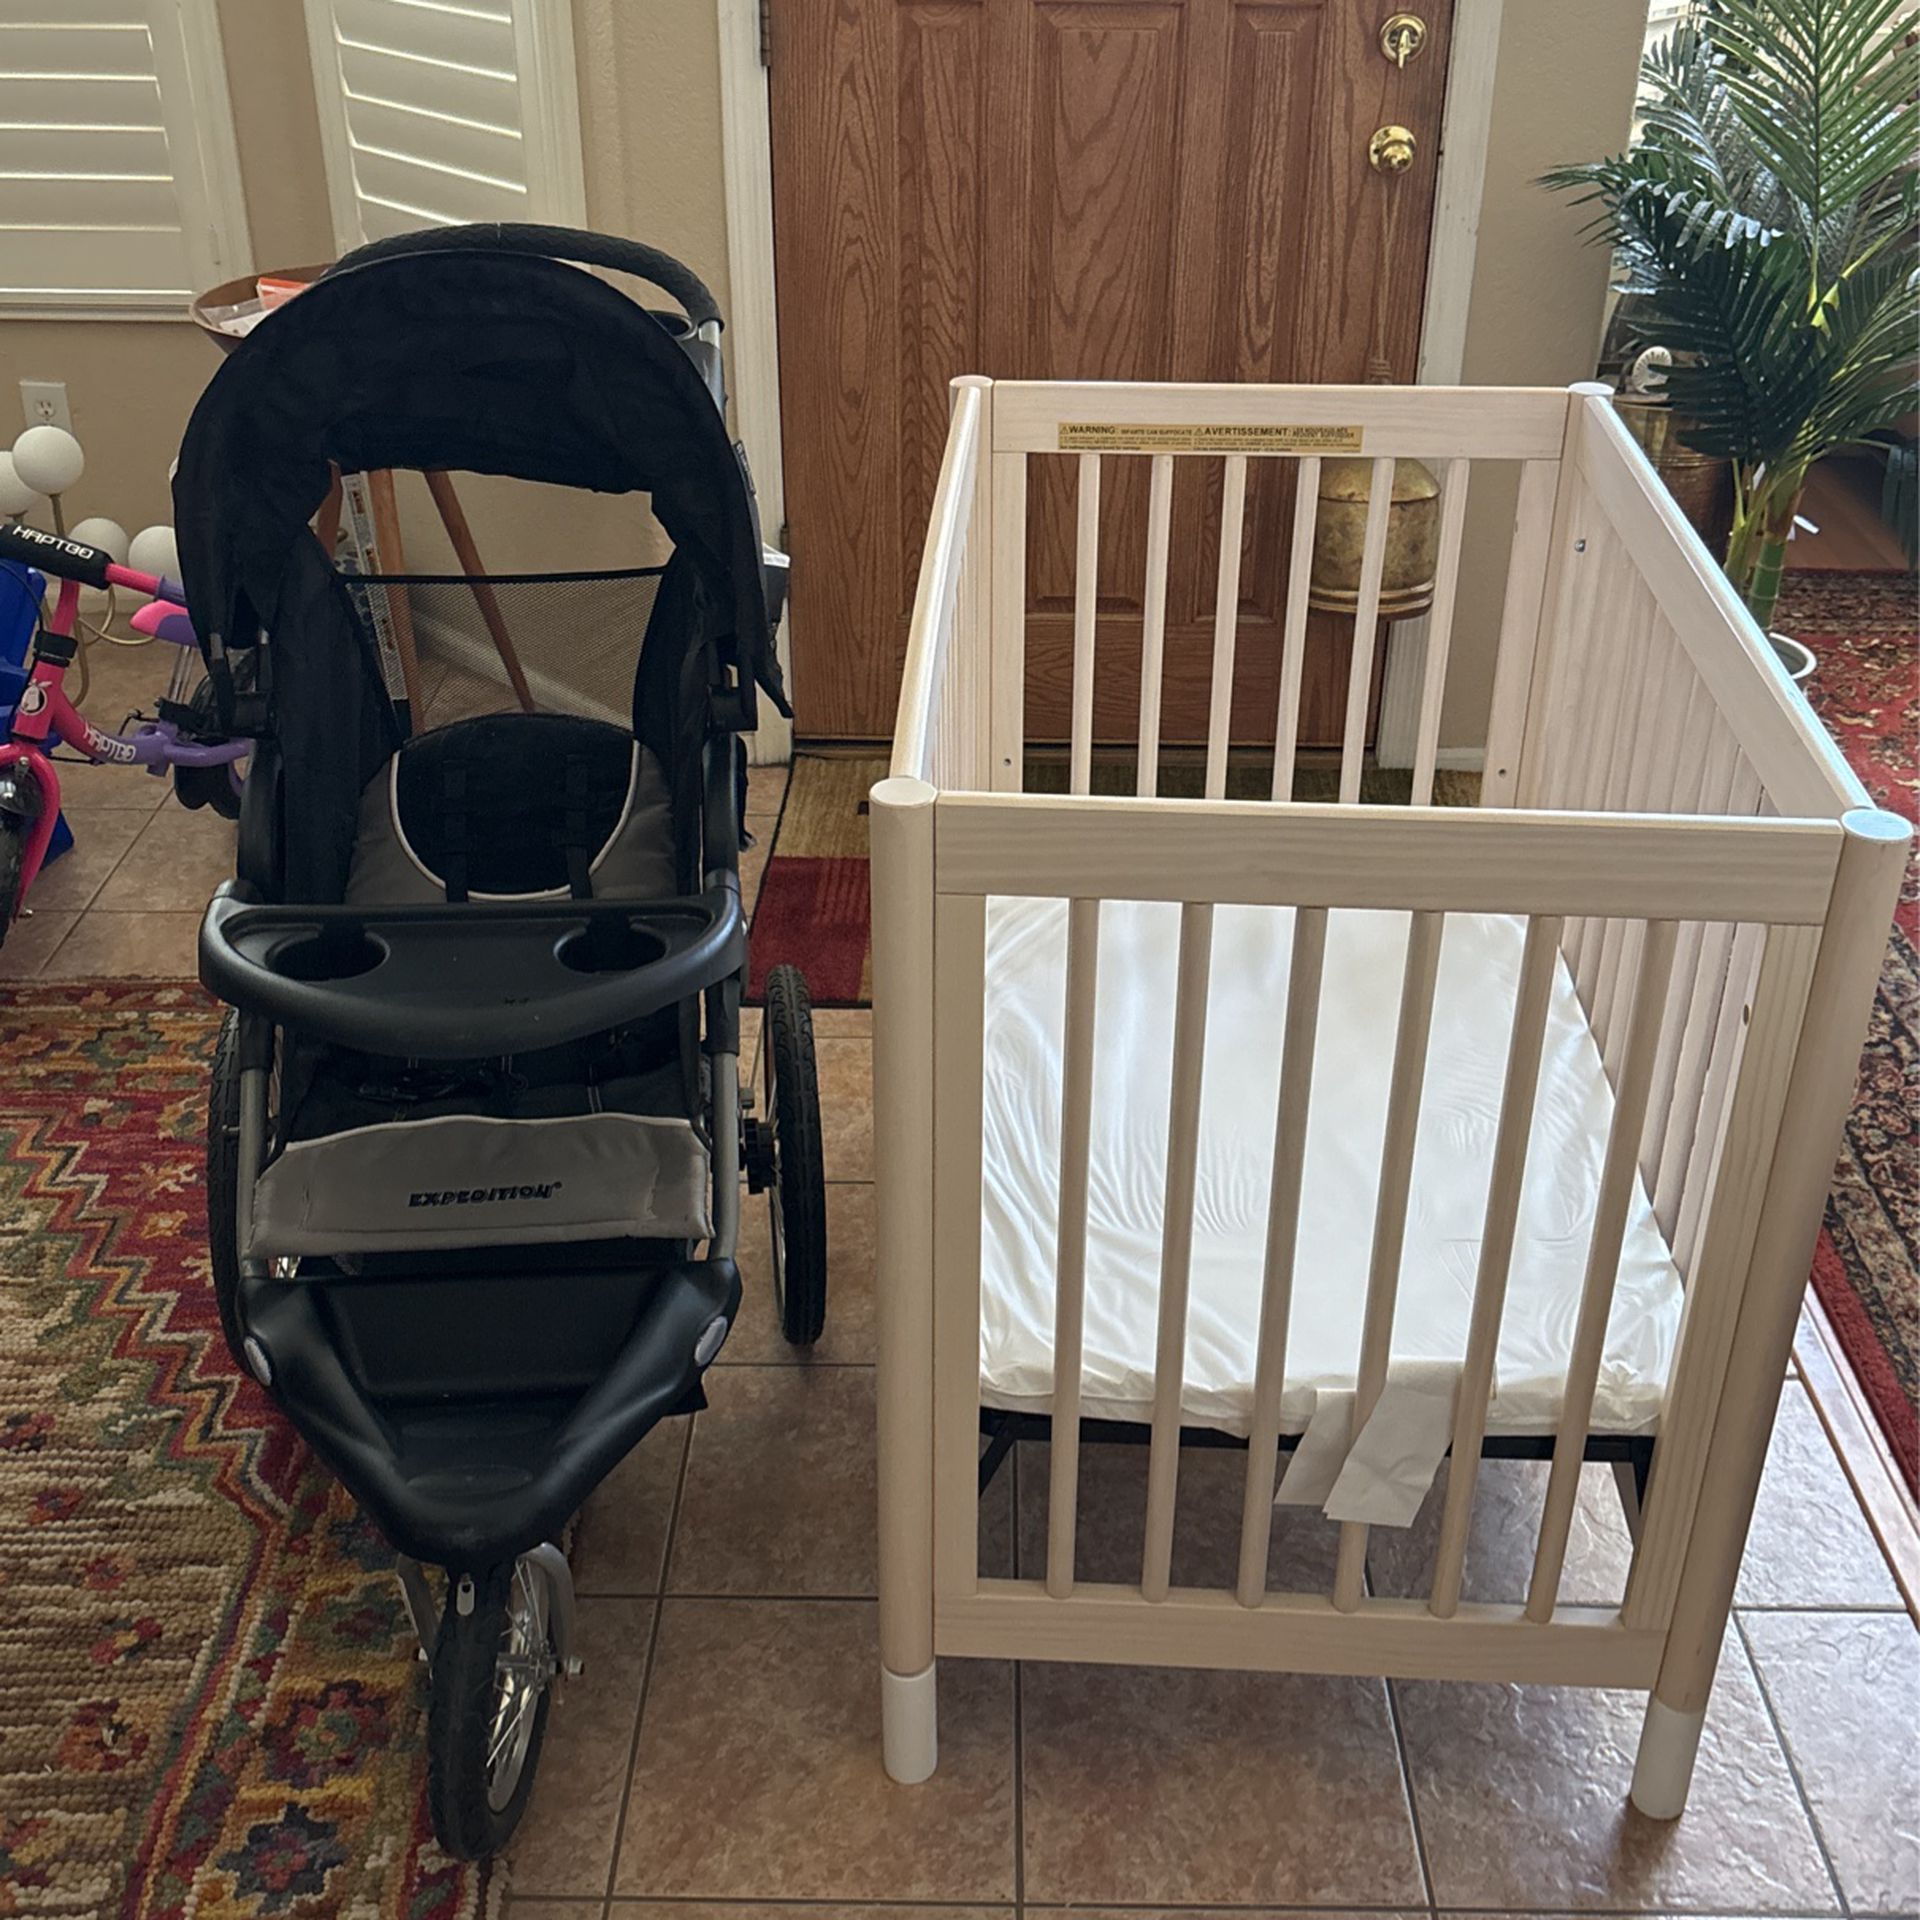 Baby Crib And Stroller (new)